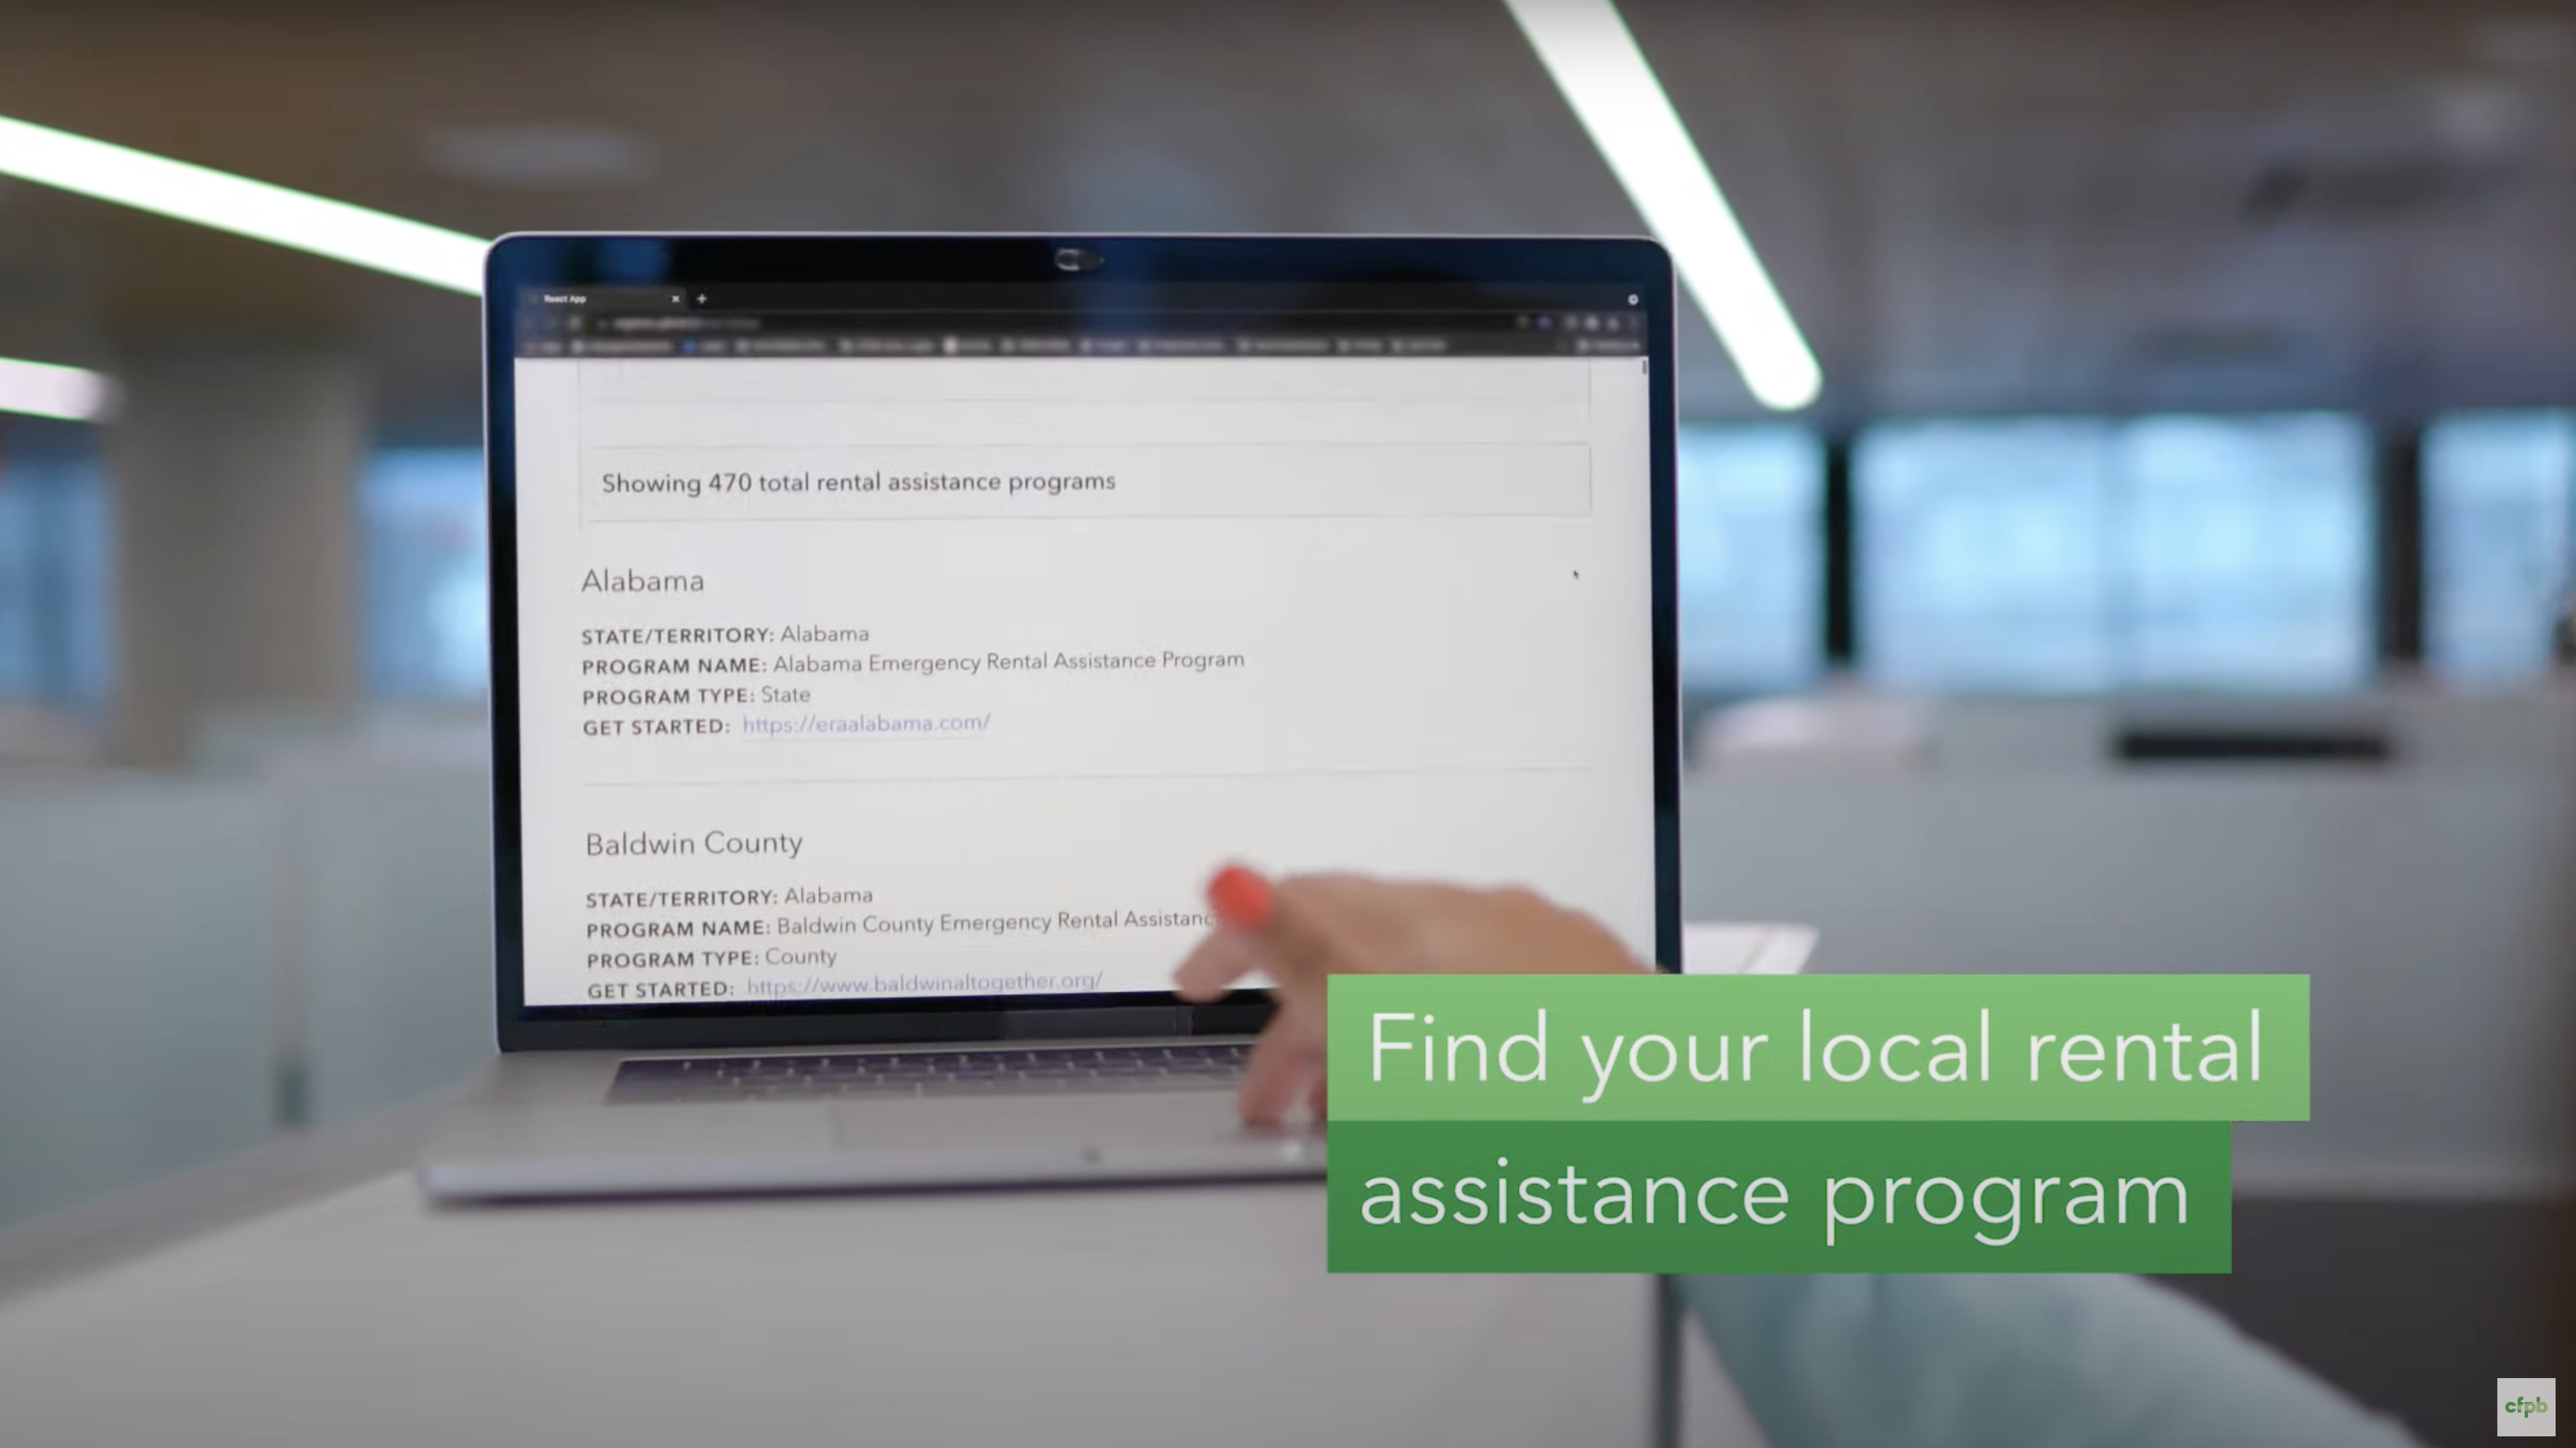 Footage of computer with the text "Find your local rental assistance program" in the lower third of the screen on a green box